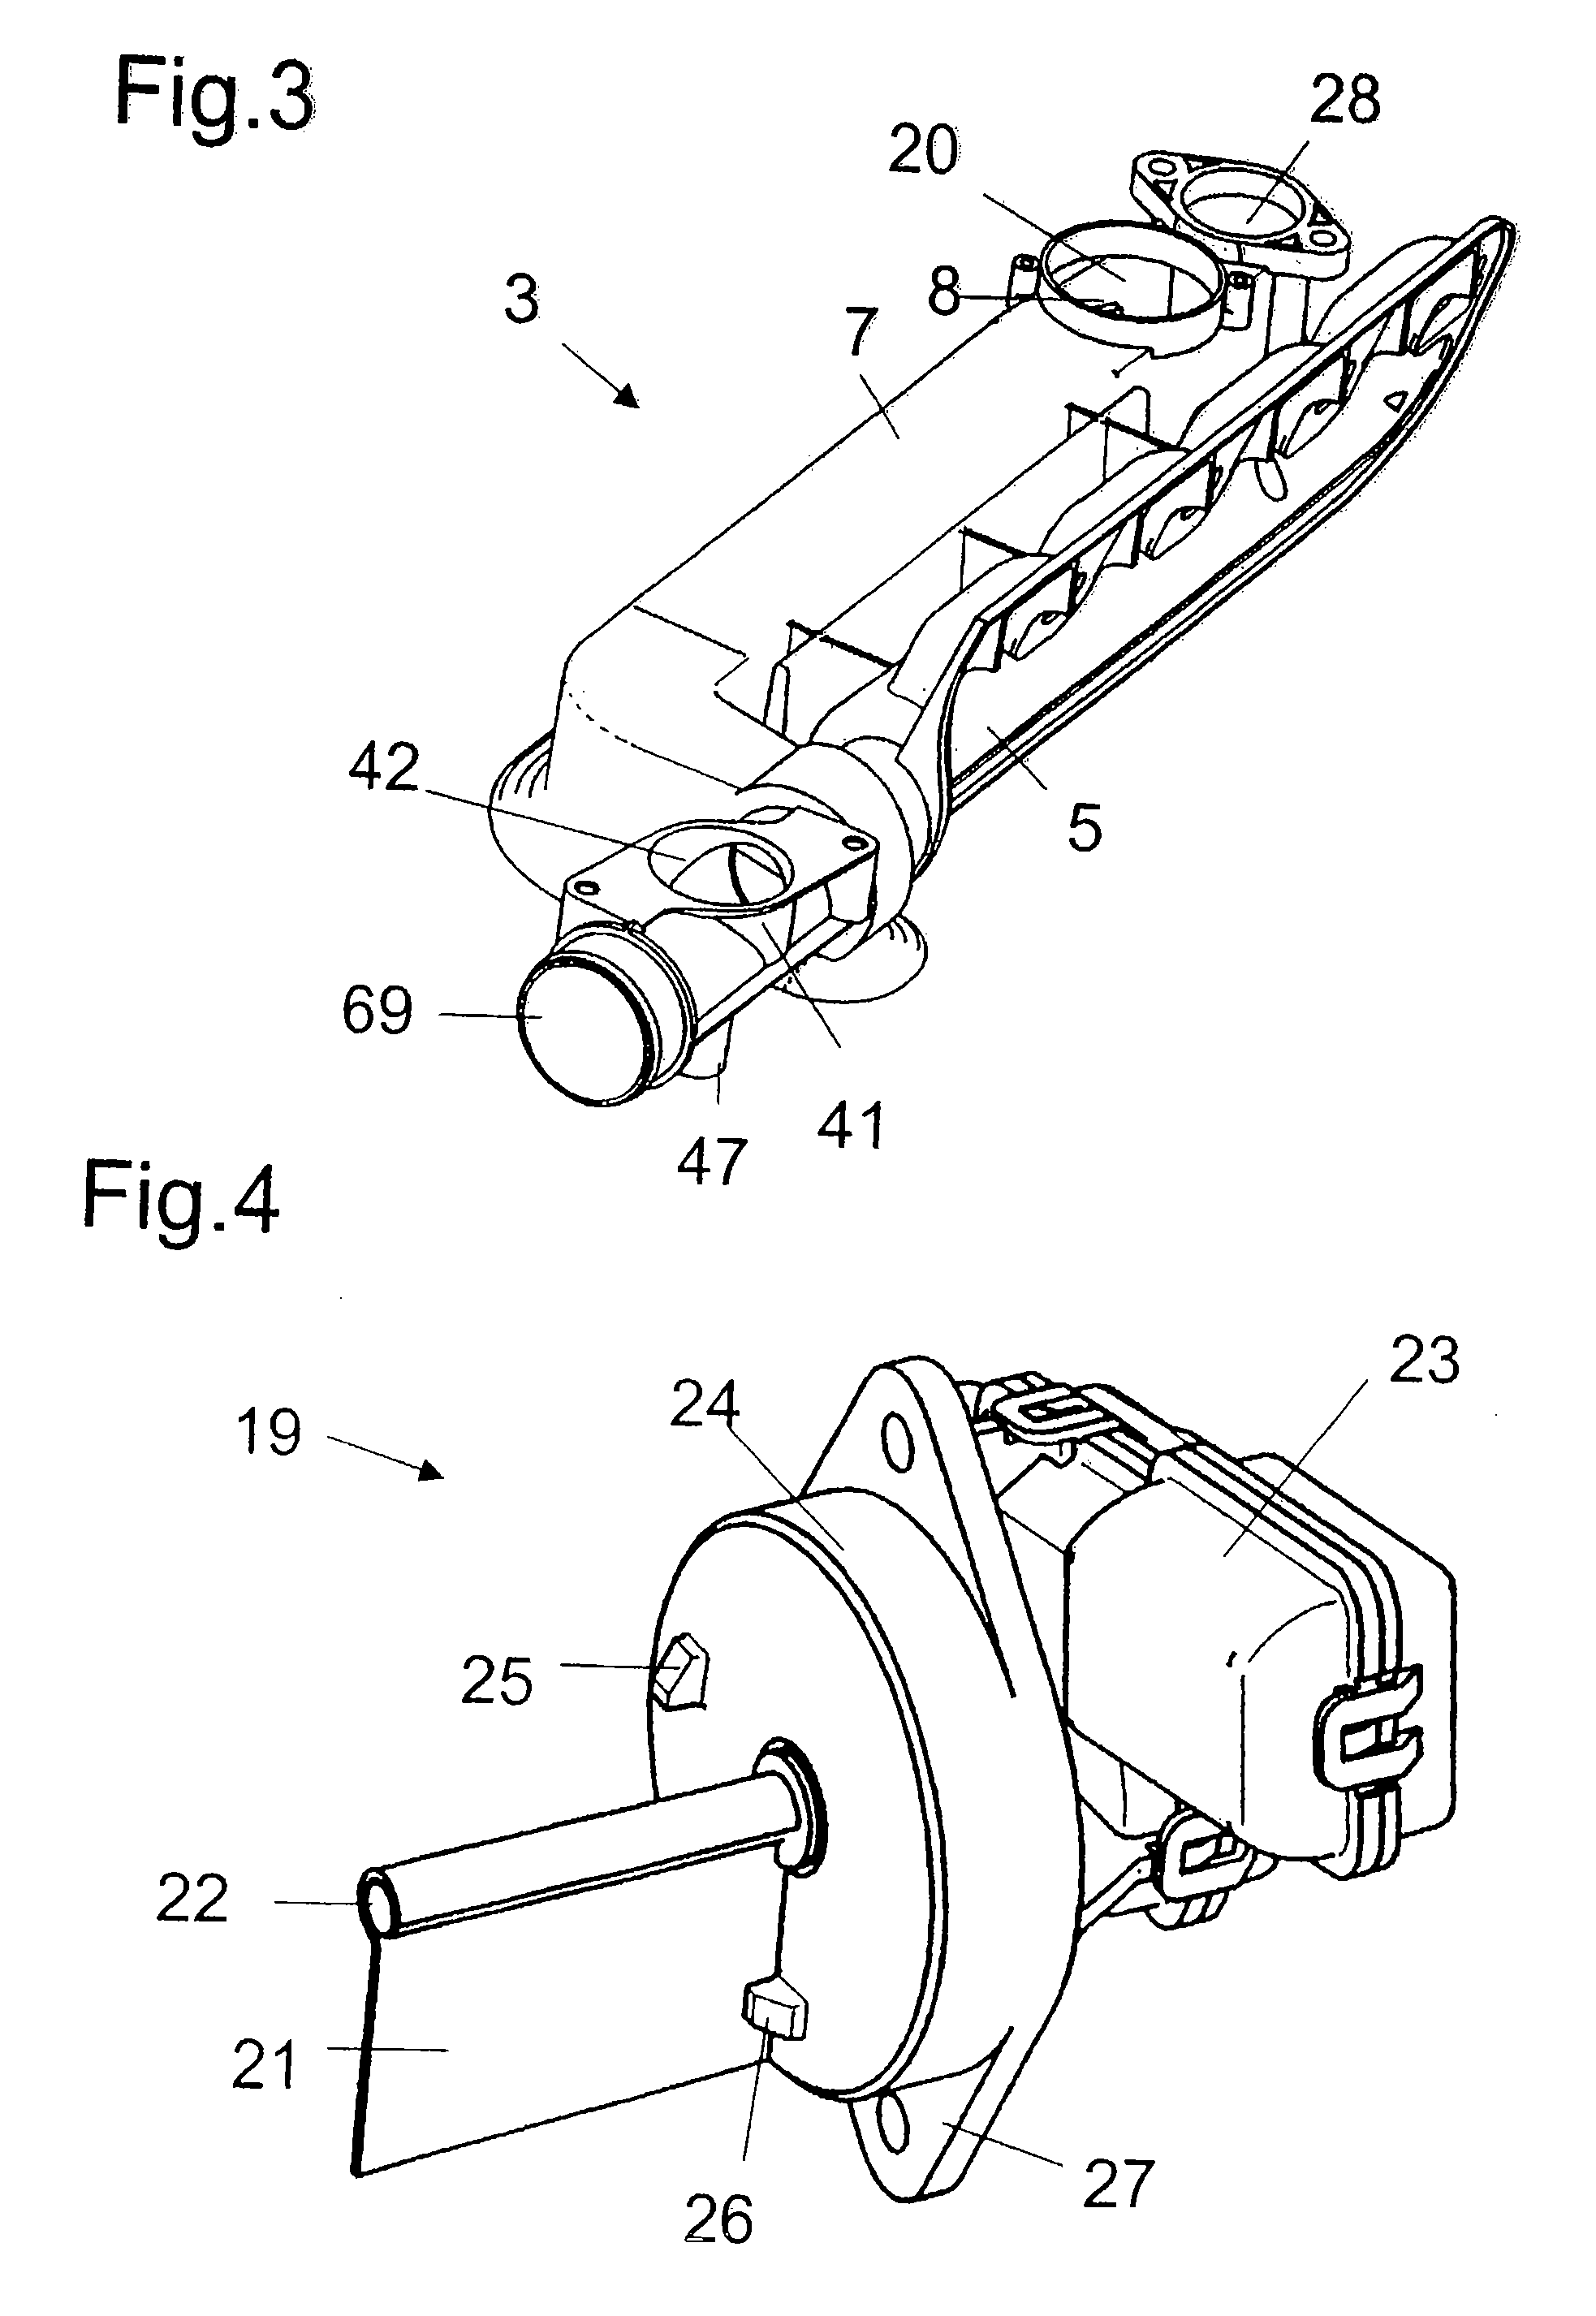 Air-intake duct system for a combustion engine